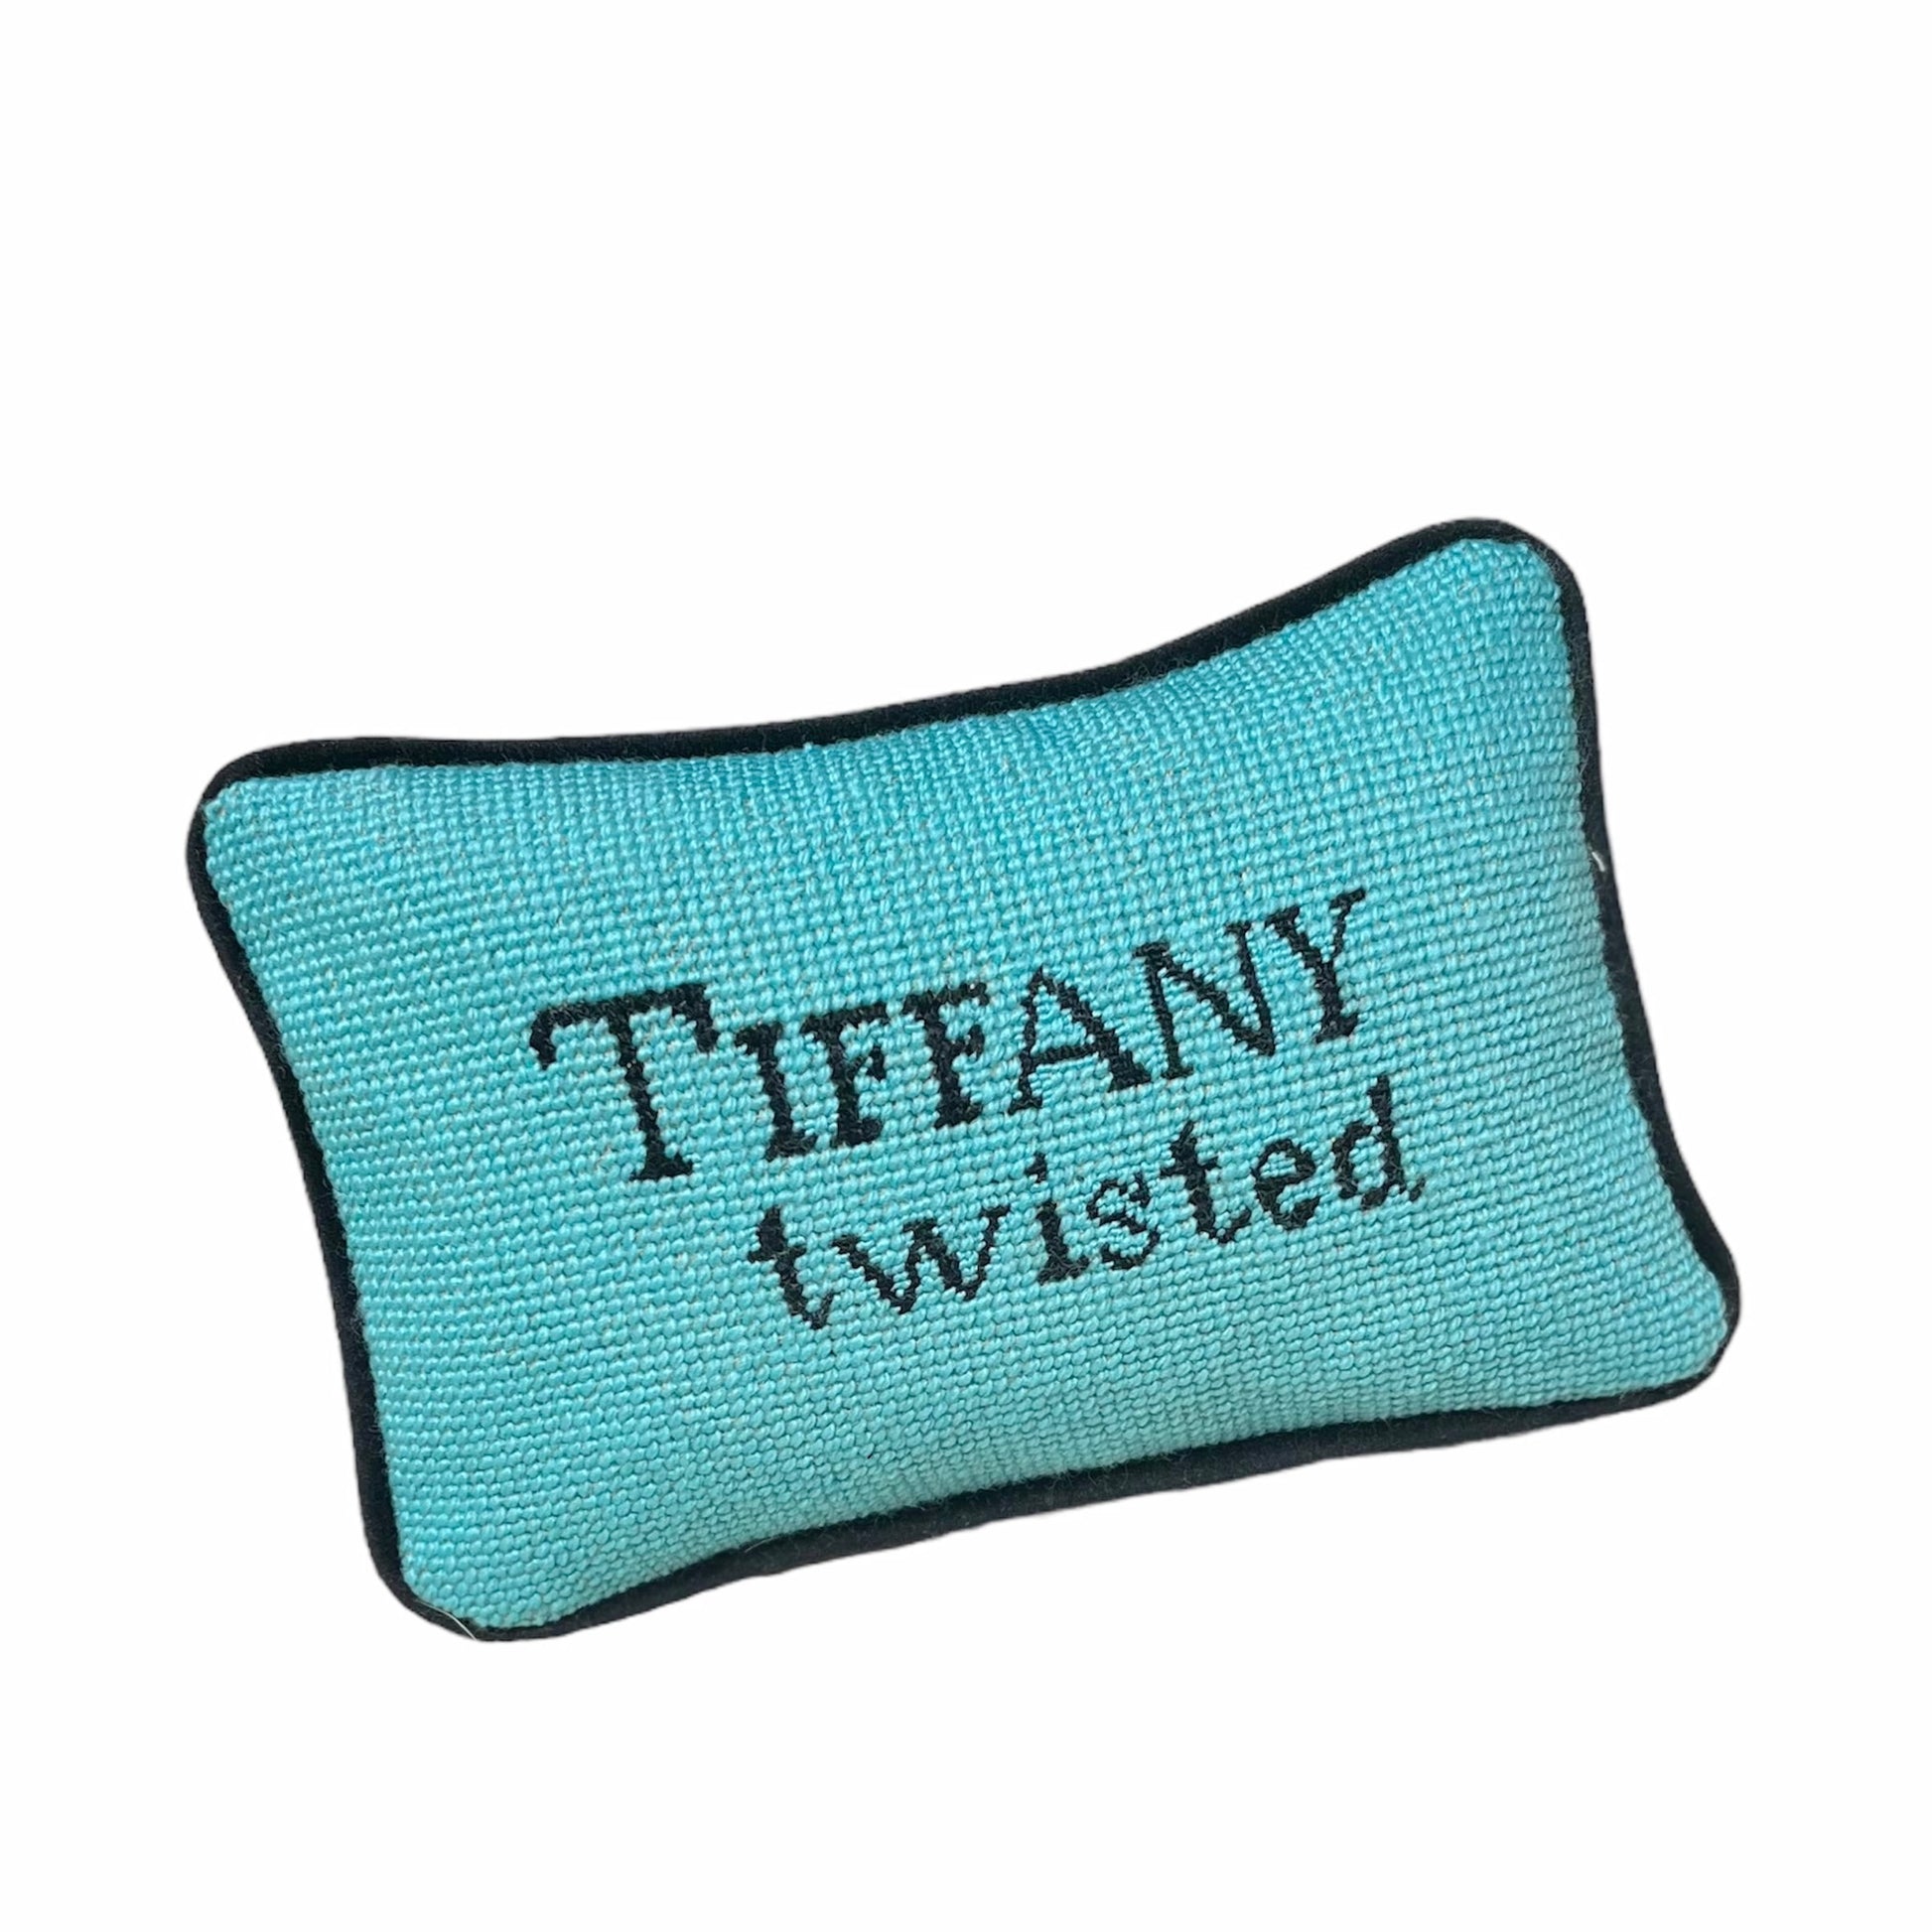 needlepoint Tiffany colored pillow reads "Tiffany Twisted" in black silk.  One of a kind pillow.